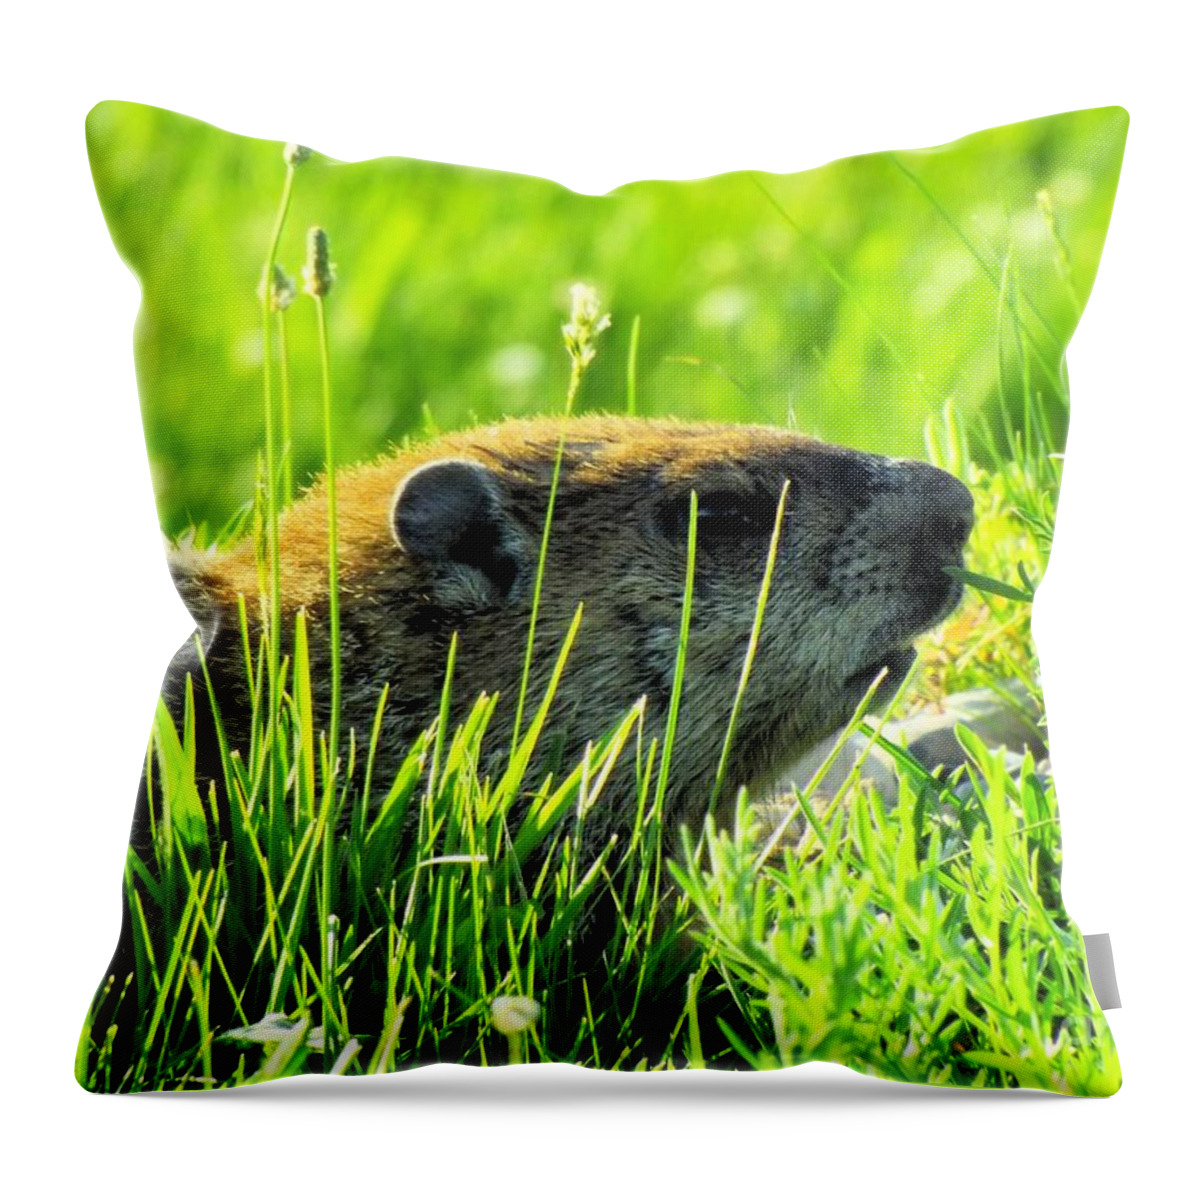 Groundhog Throw Pillow featuring the photograph The Sound Of Silence by Robyn King